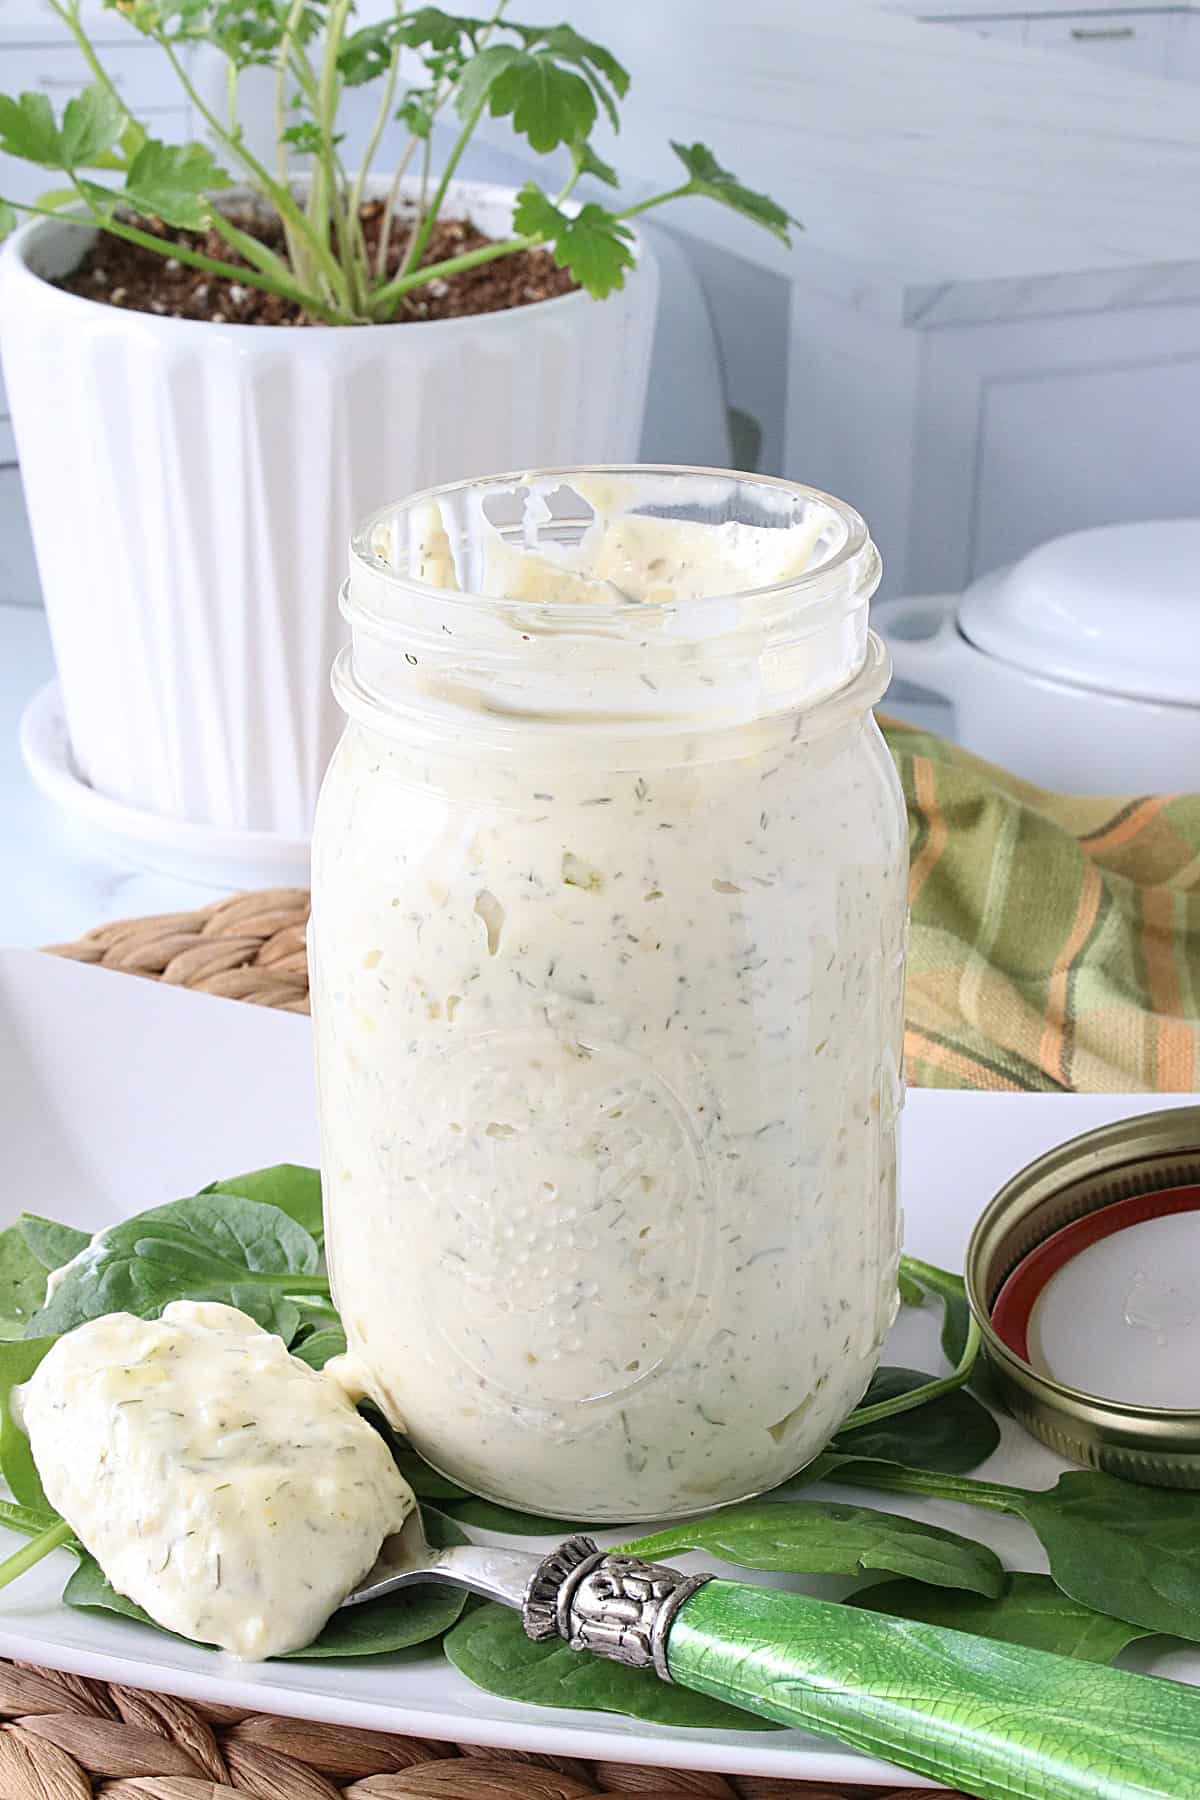 A glass jar filled with Homemade Dill Tartar Sauce along with a spoonful in front.